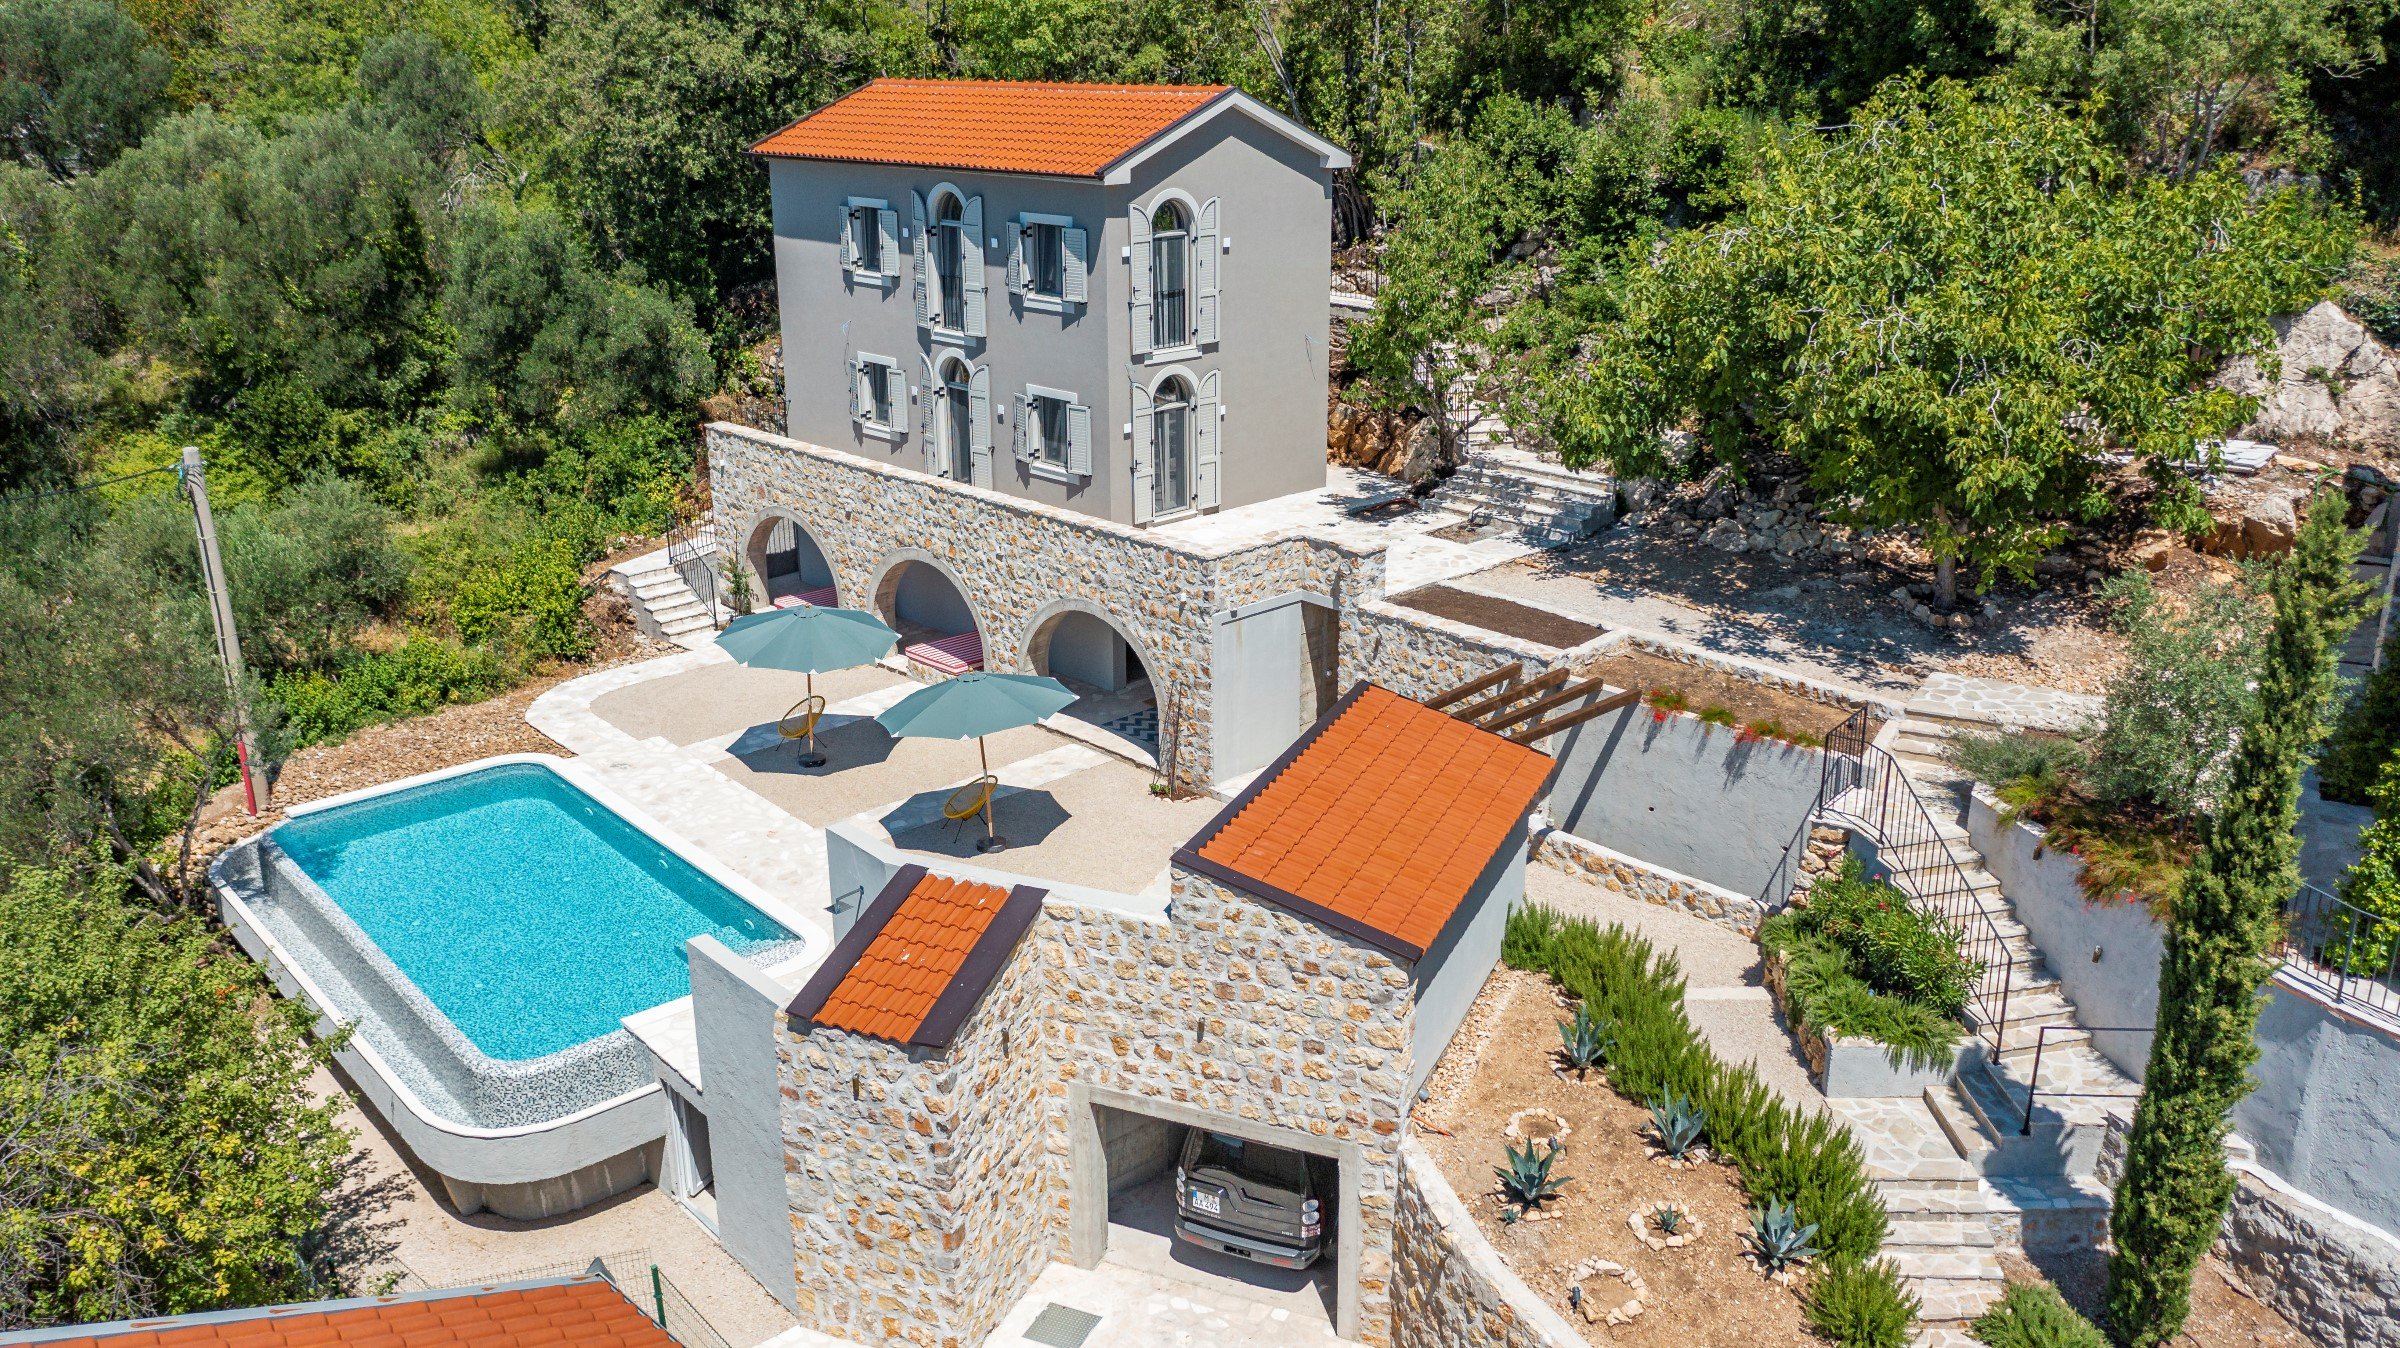 Francis York The Trebesin Boutique Resort Luxury Turnkey Property For Sale in Montenegro 4.jpg